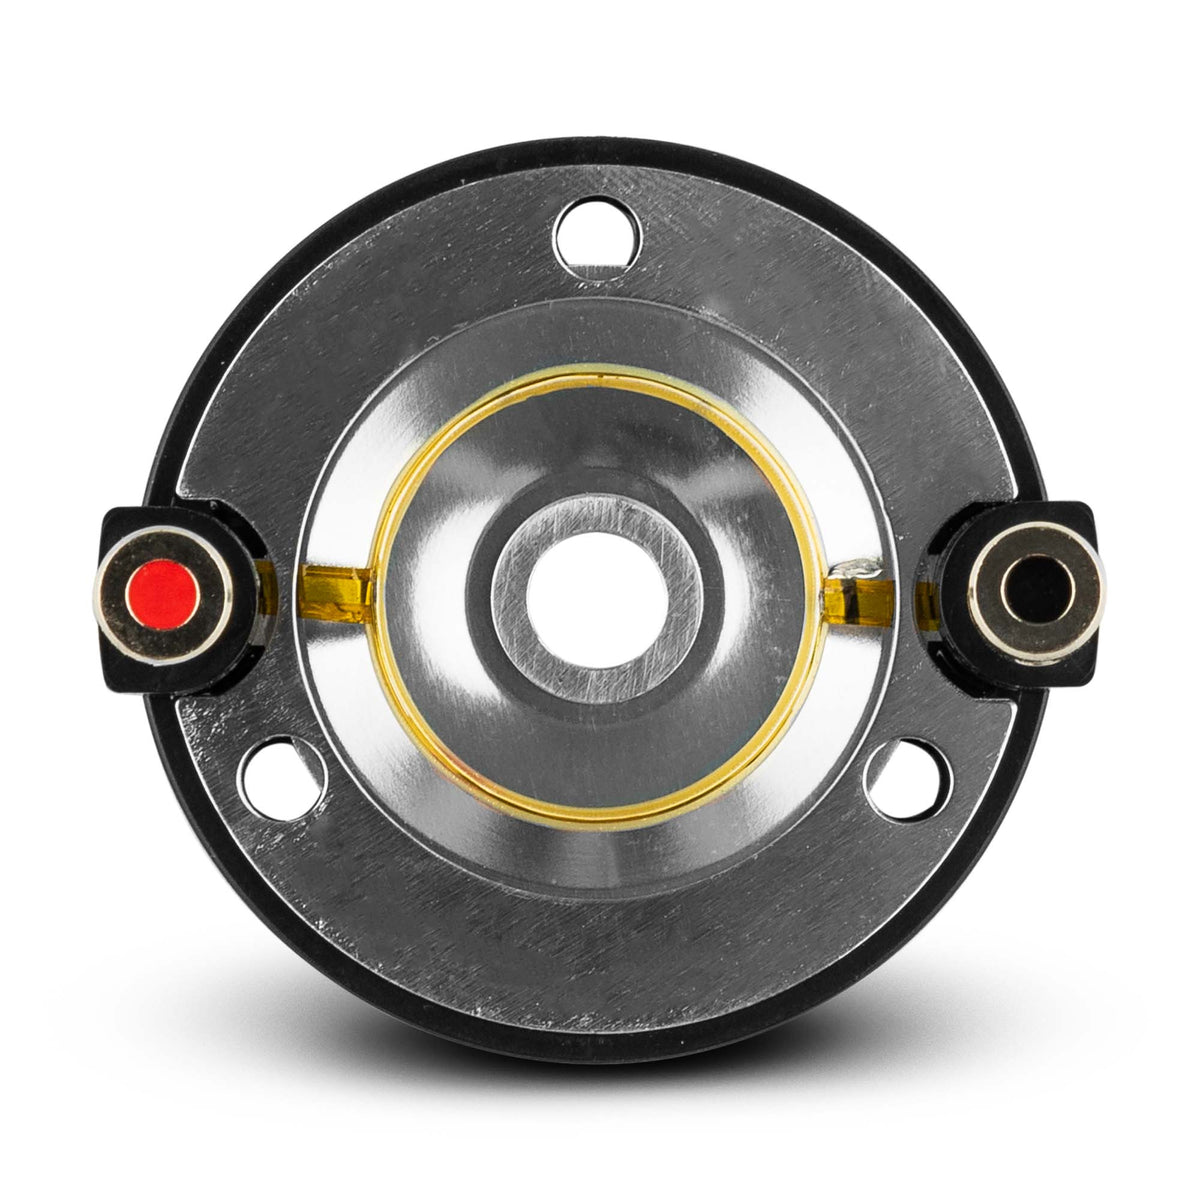 PRO 1" Replacement Diaphragm for GTX1 and Universal 4-Ohm